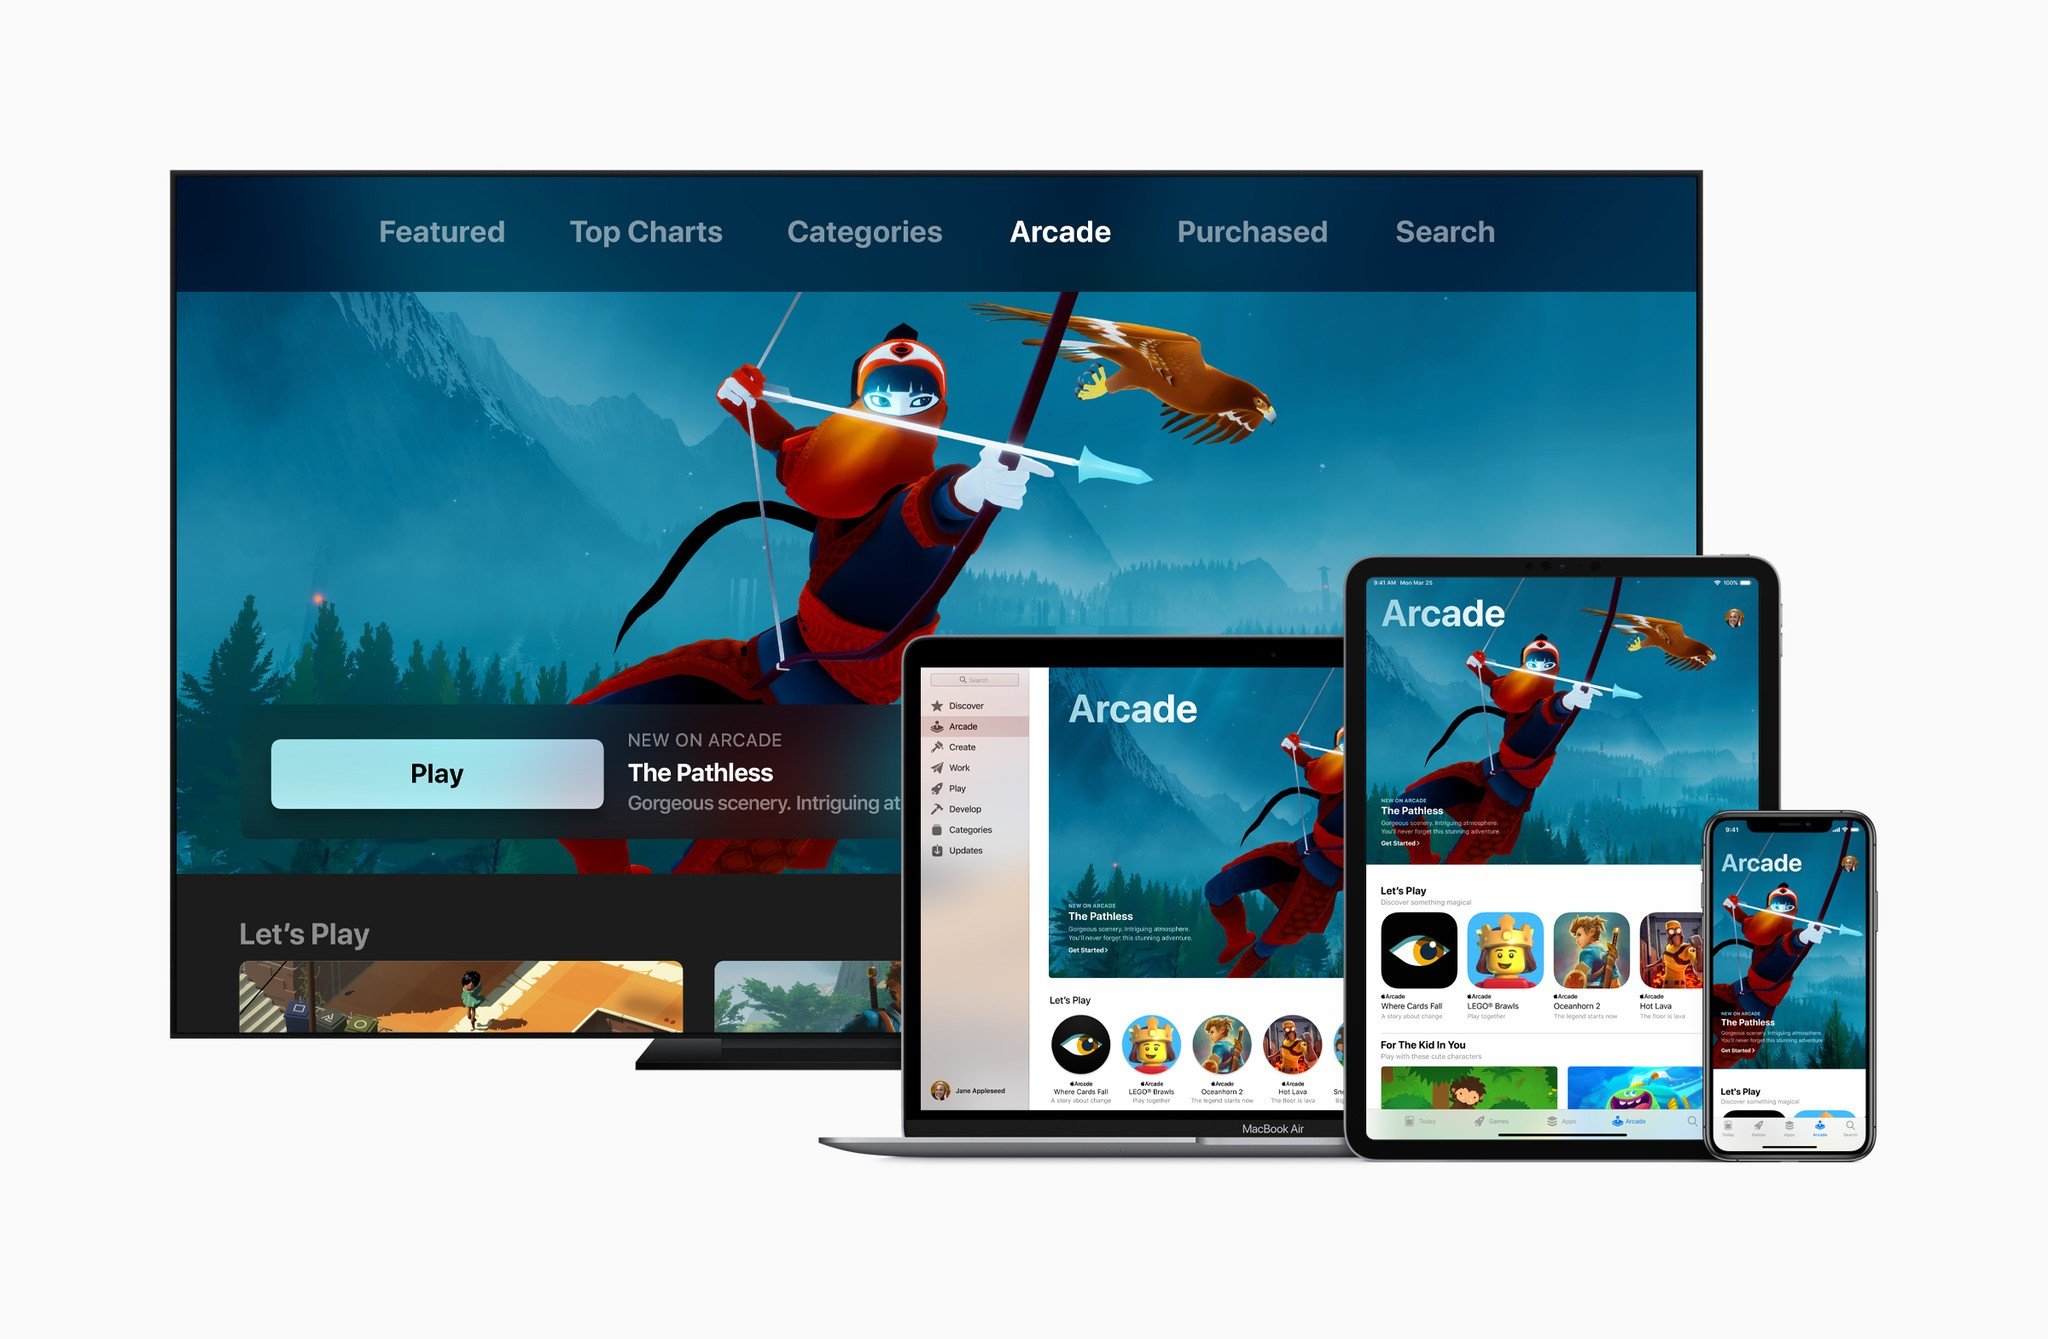 Apple Arcade in the App Store running on multiple devices